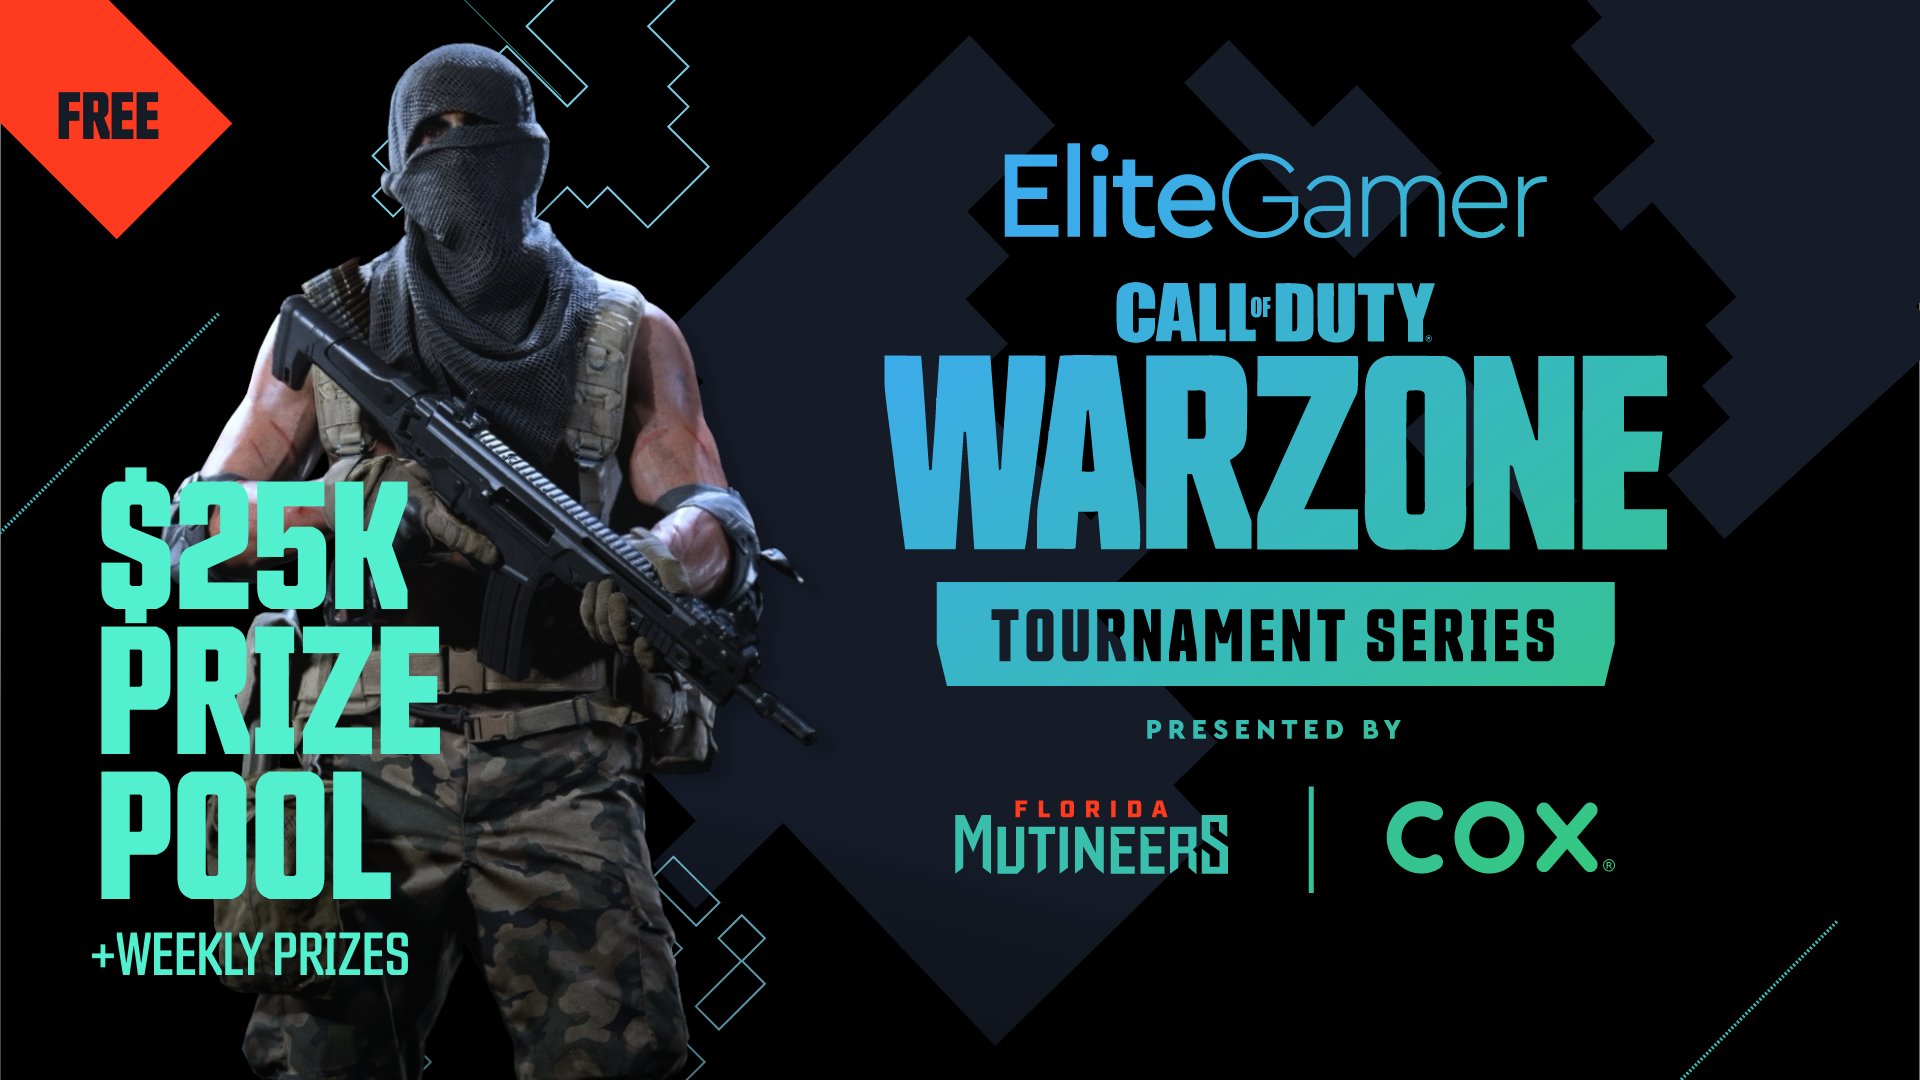 Florida Mutineers partners with Cox Communications to host Elite Gamer